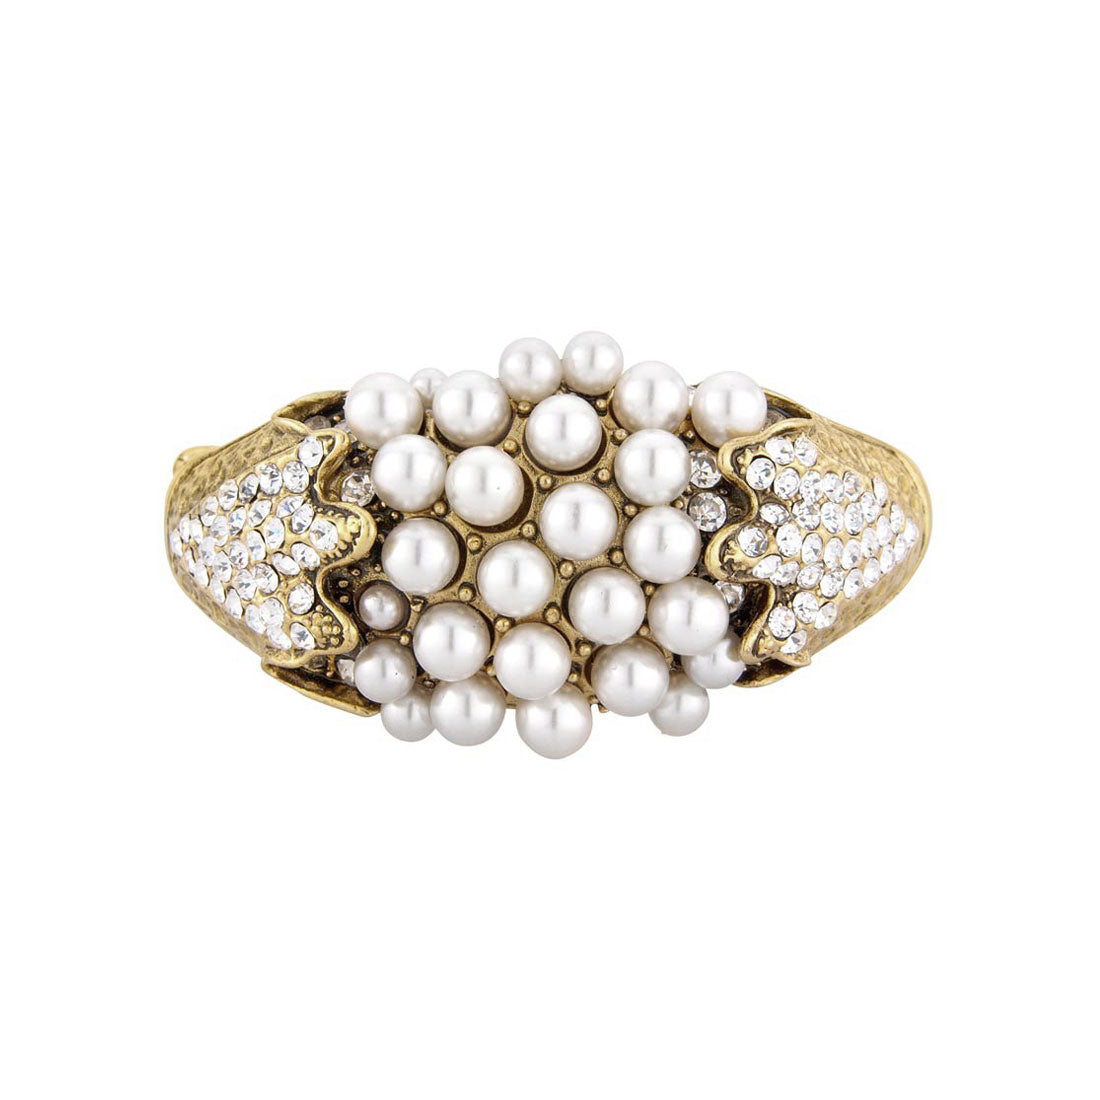 Pearls of the Past Vintage Gold Bangle